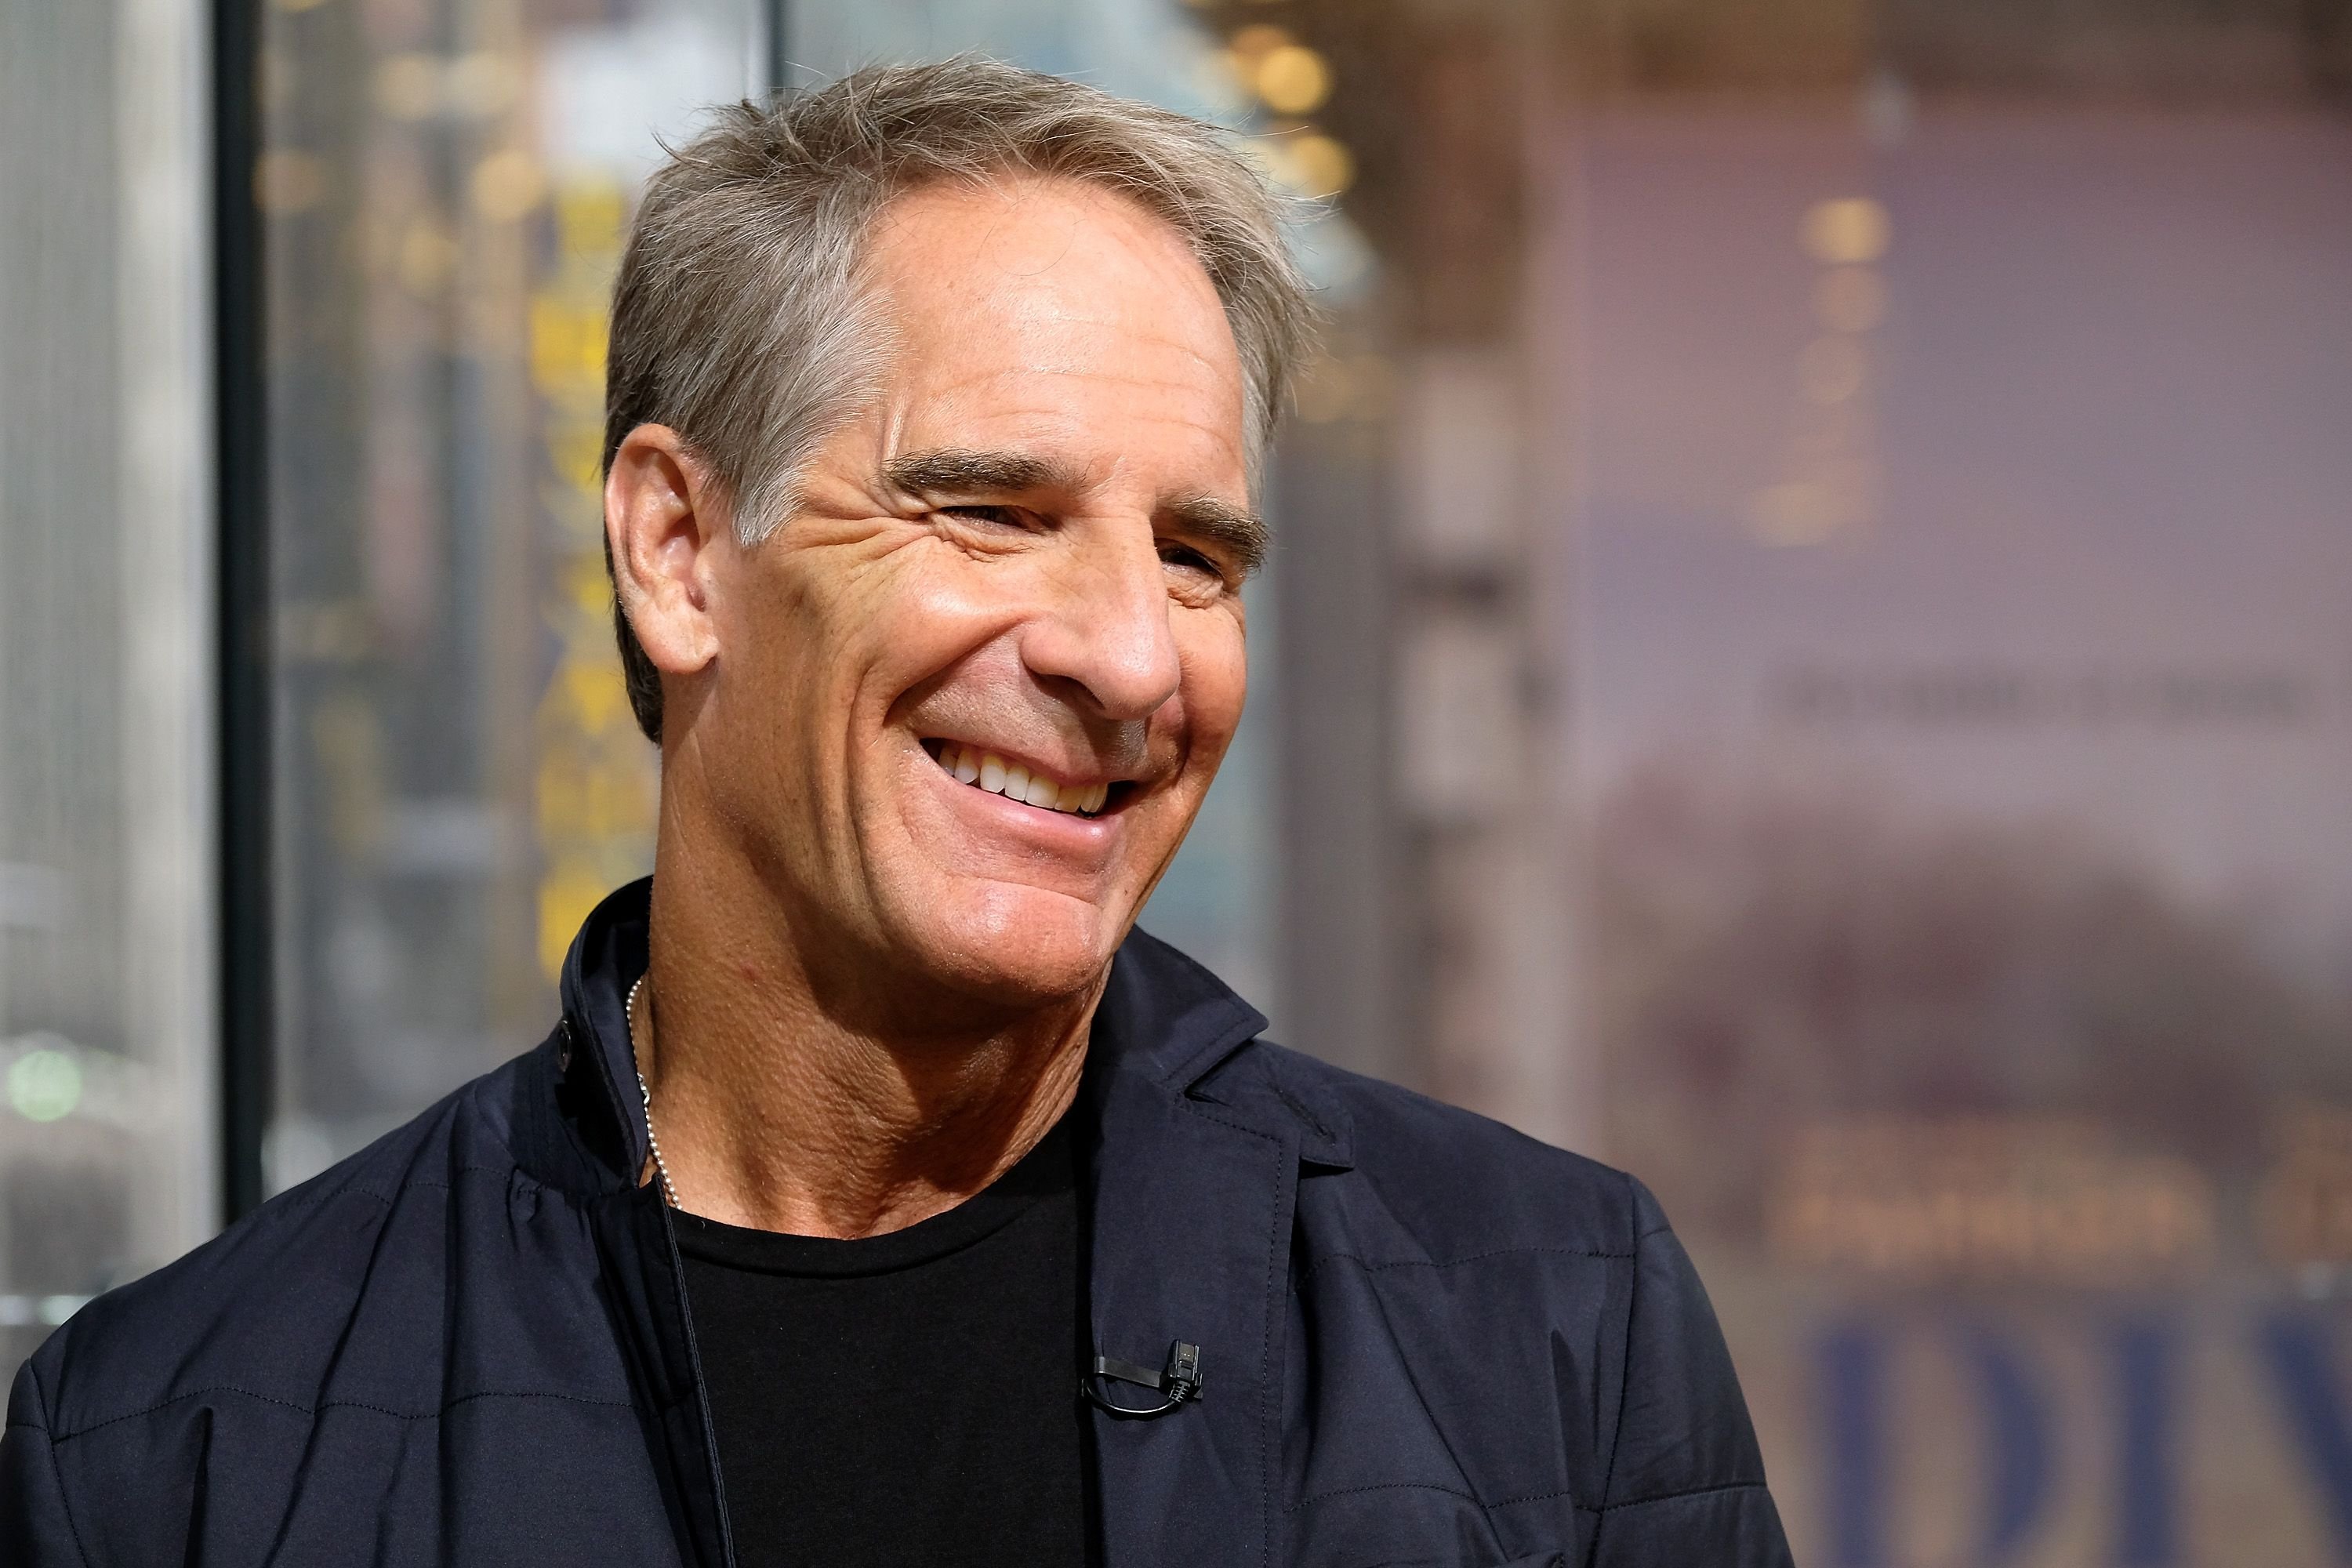 Scott Bakula visits "Extra" at their New York studios at H&M in Times Square on September 19, 2016, in New York City | Photo: D Dipasupil/Getty Images